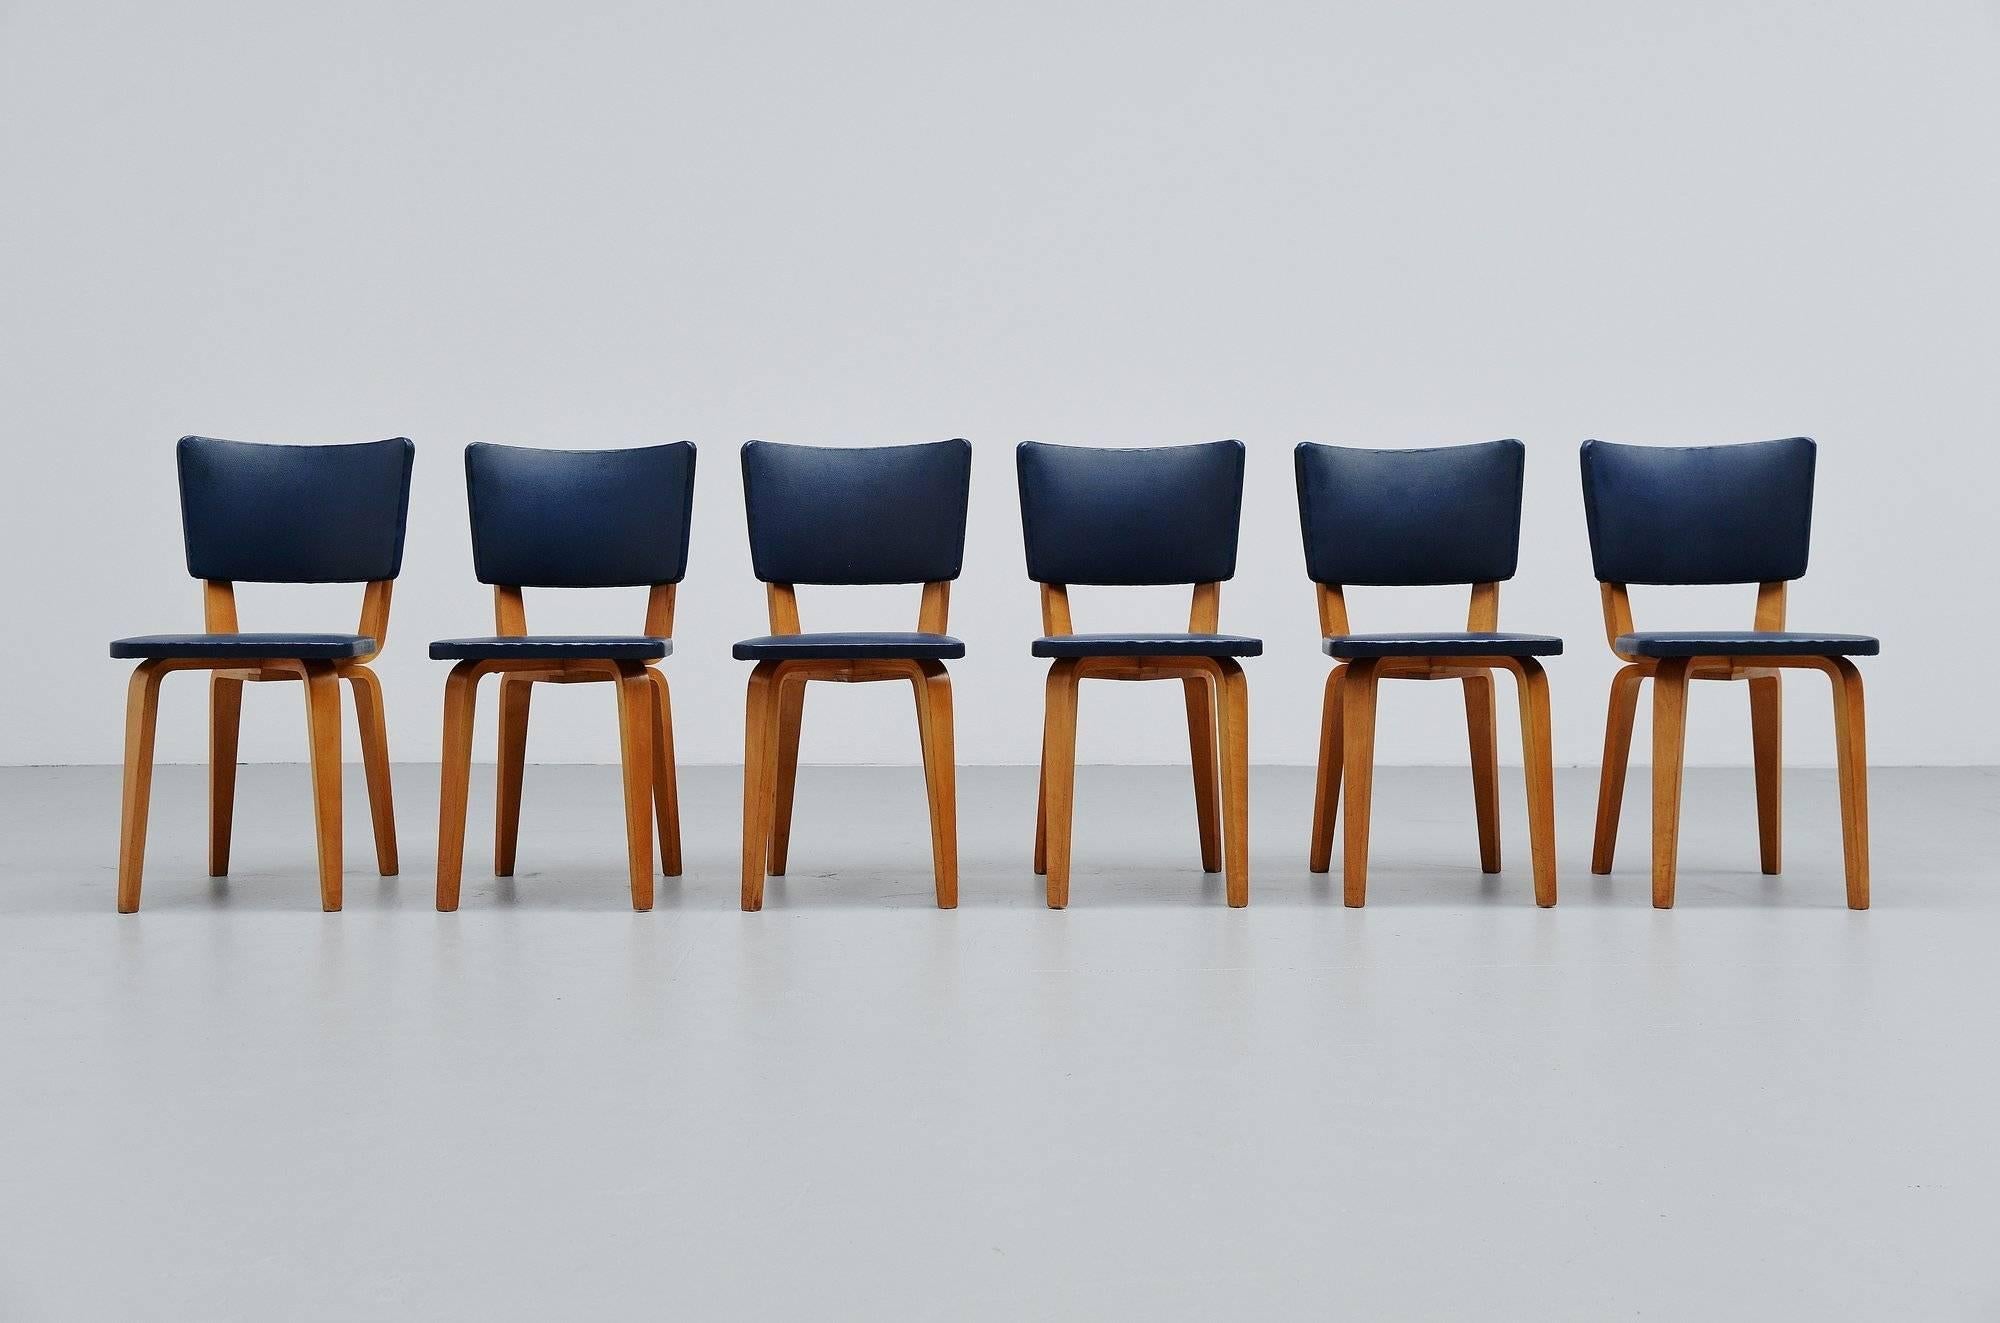 Nice and original set of six dining chairs designed by Cor Alons and manufactured by Gouda Den Boer, Holland 1949. These chairs are model 500 and have birch plywood frames with original dark blue faux leather upholstery. The upholstery is compared